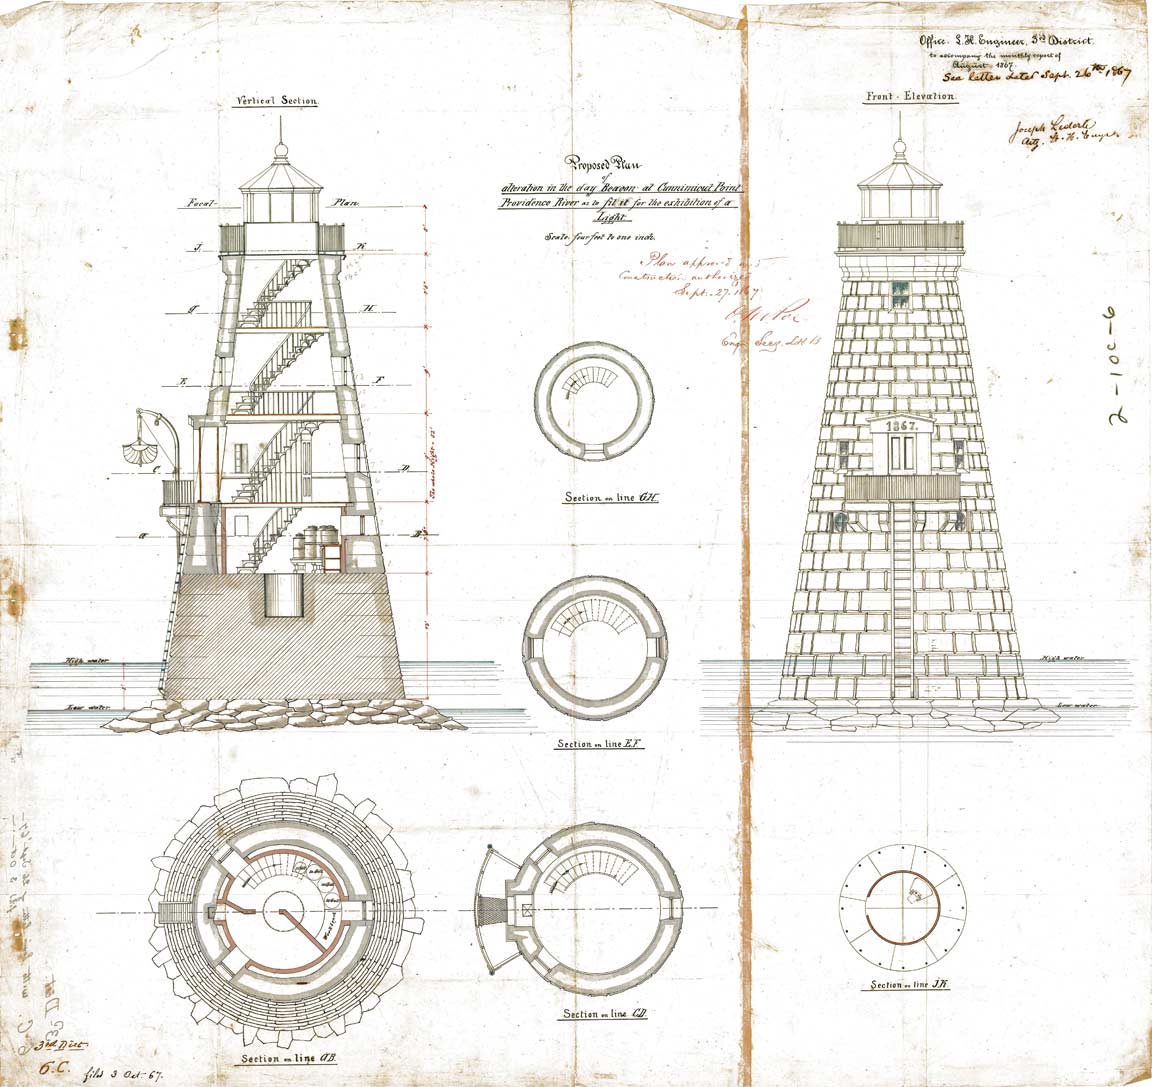 Proposed Plan of Alteration in the daybeacon at Connimicut Point - 1867